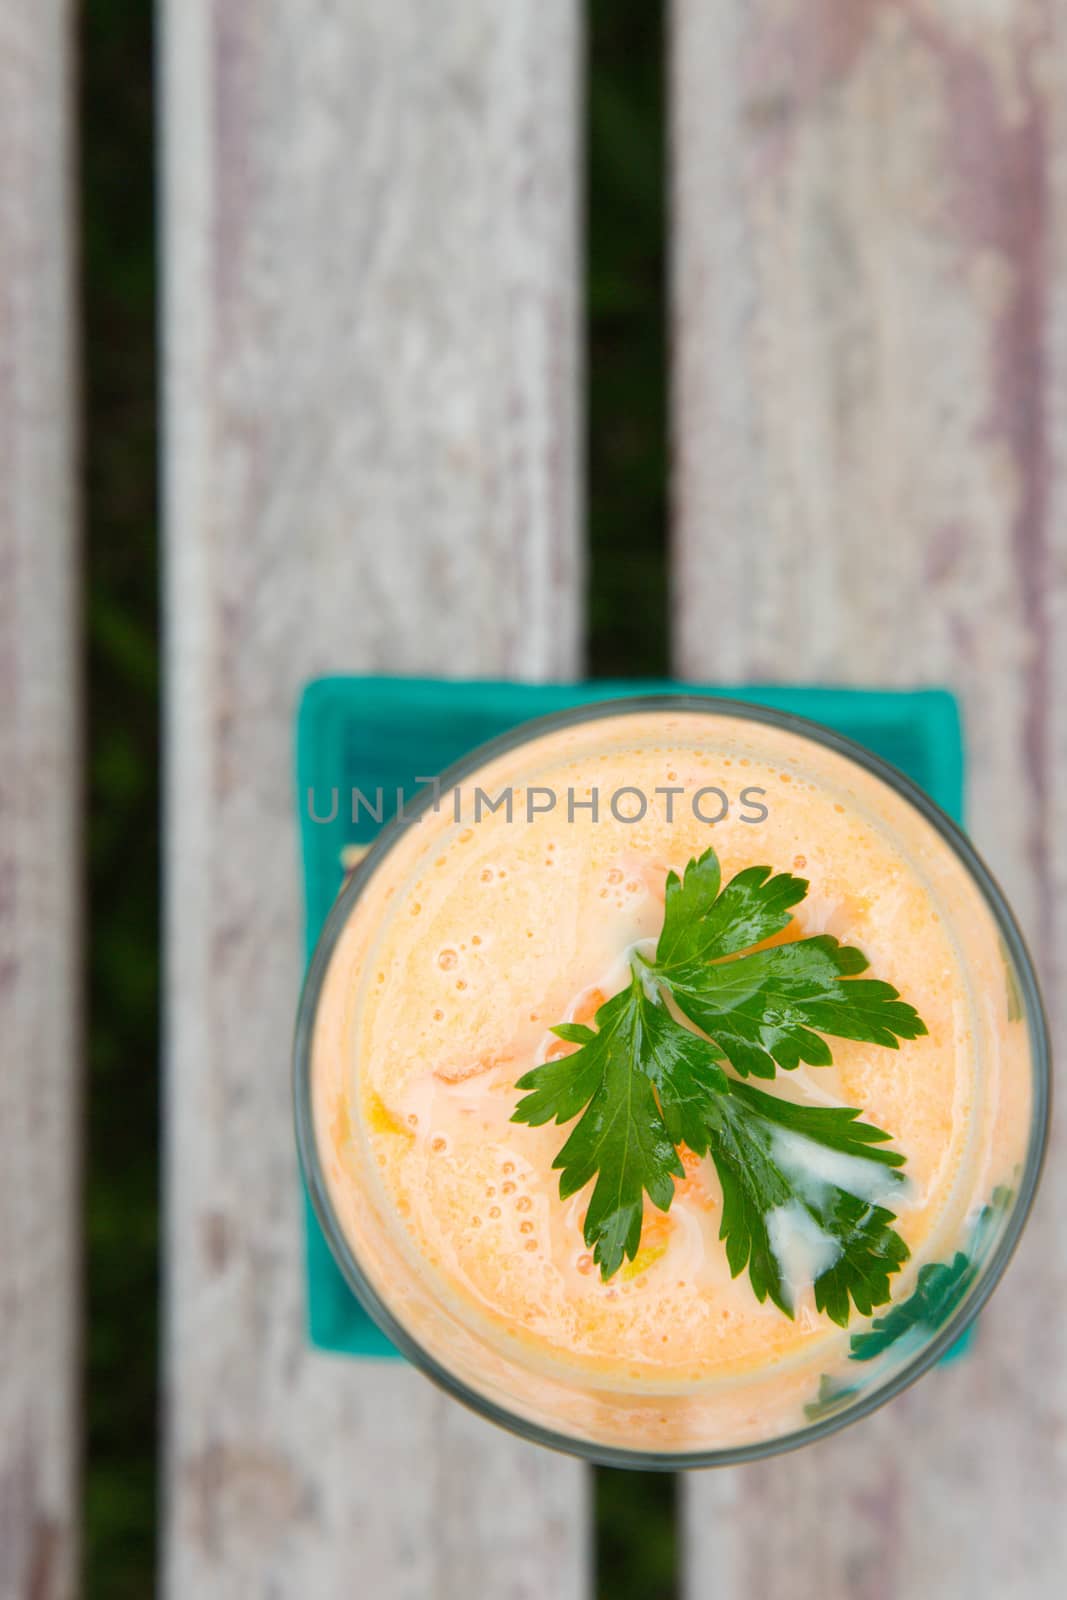 Carrot smootie with fresh parsley leaves by tolikoff_photography